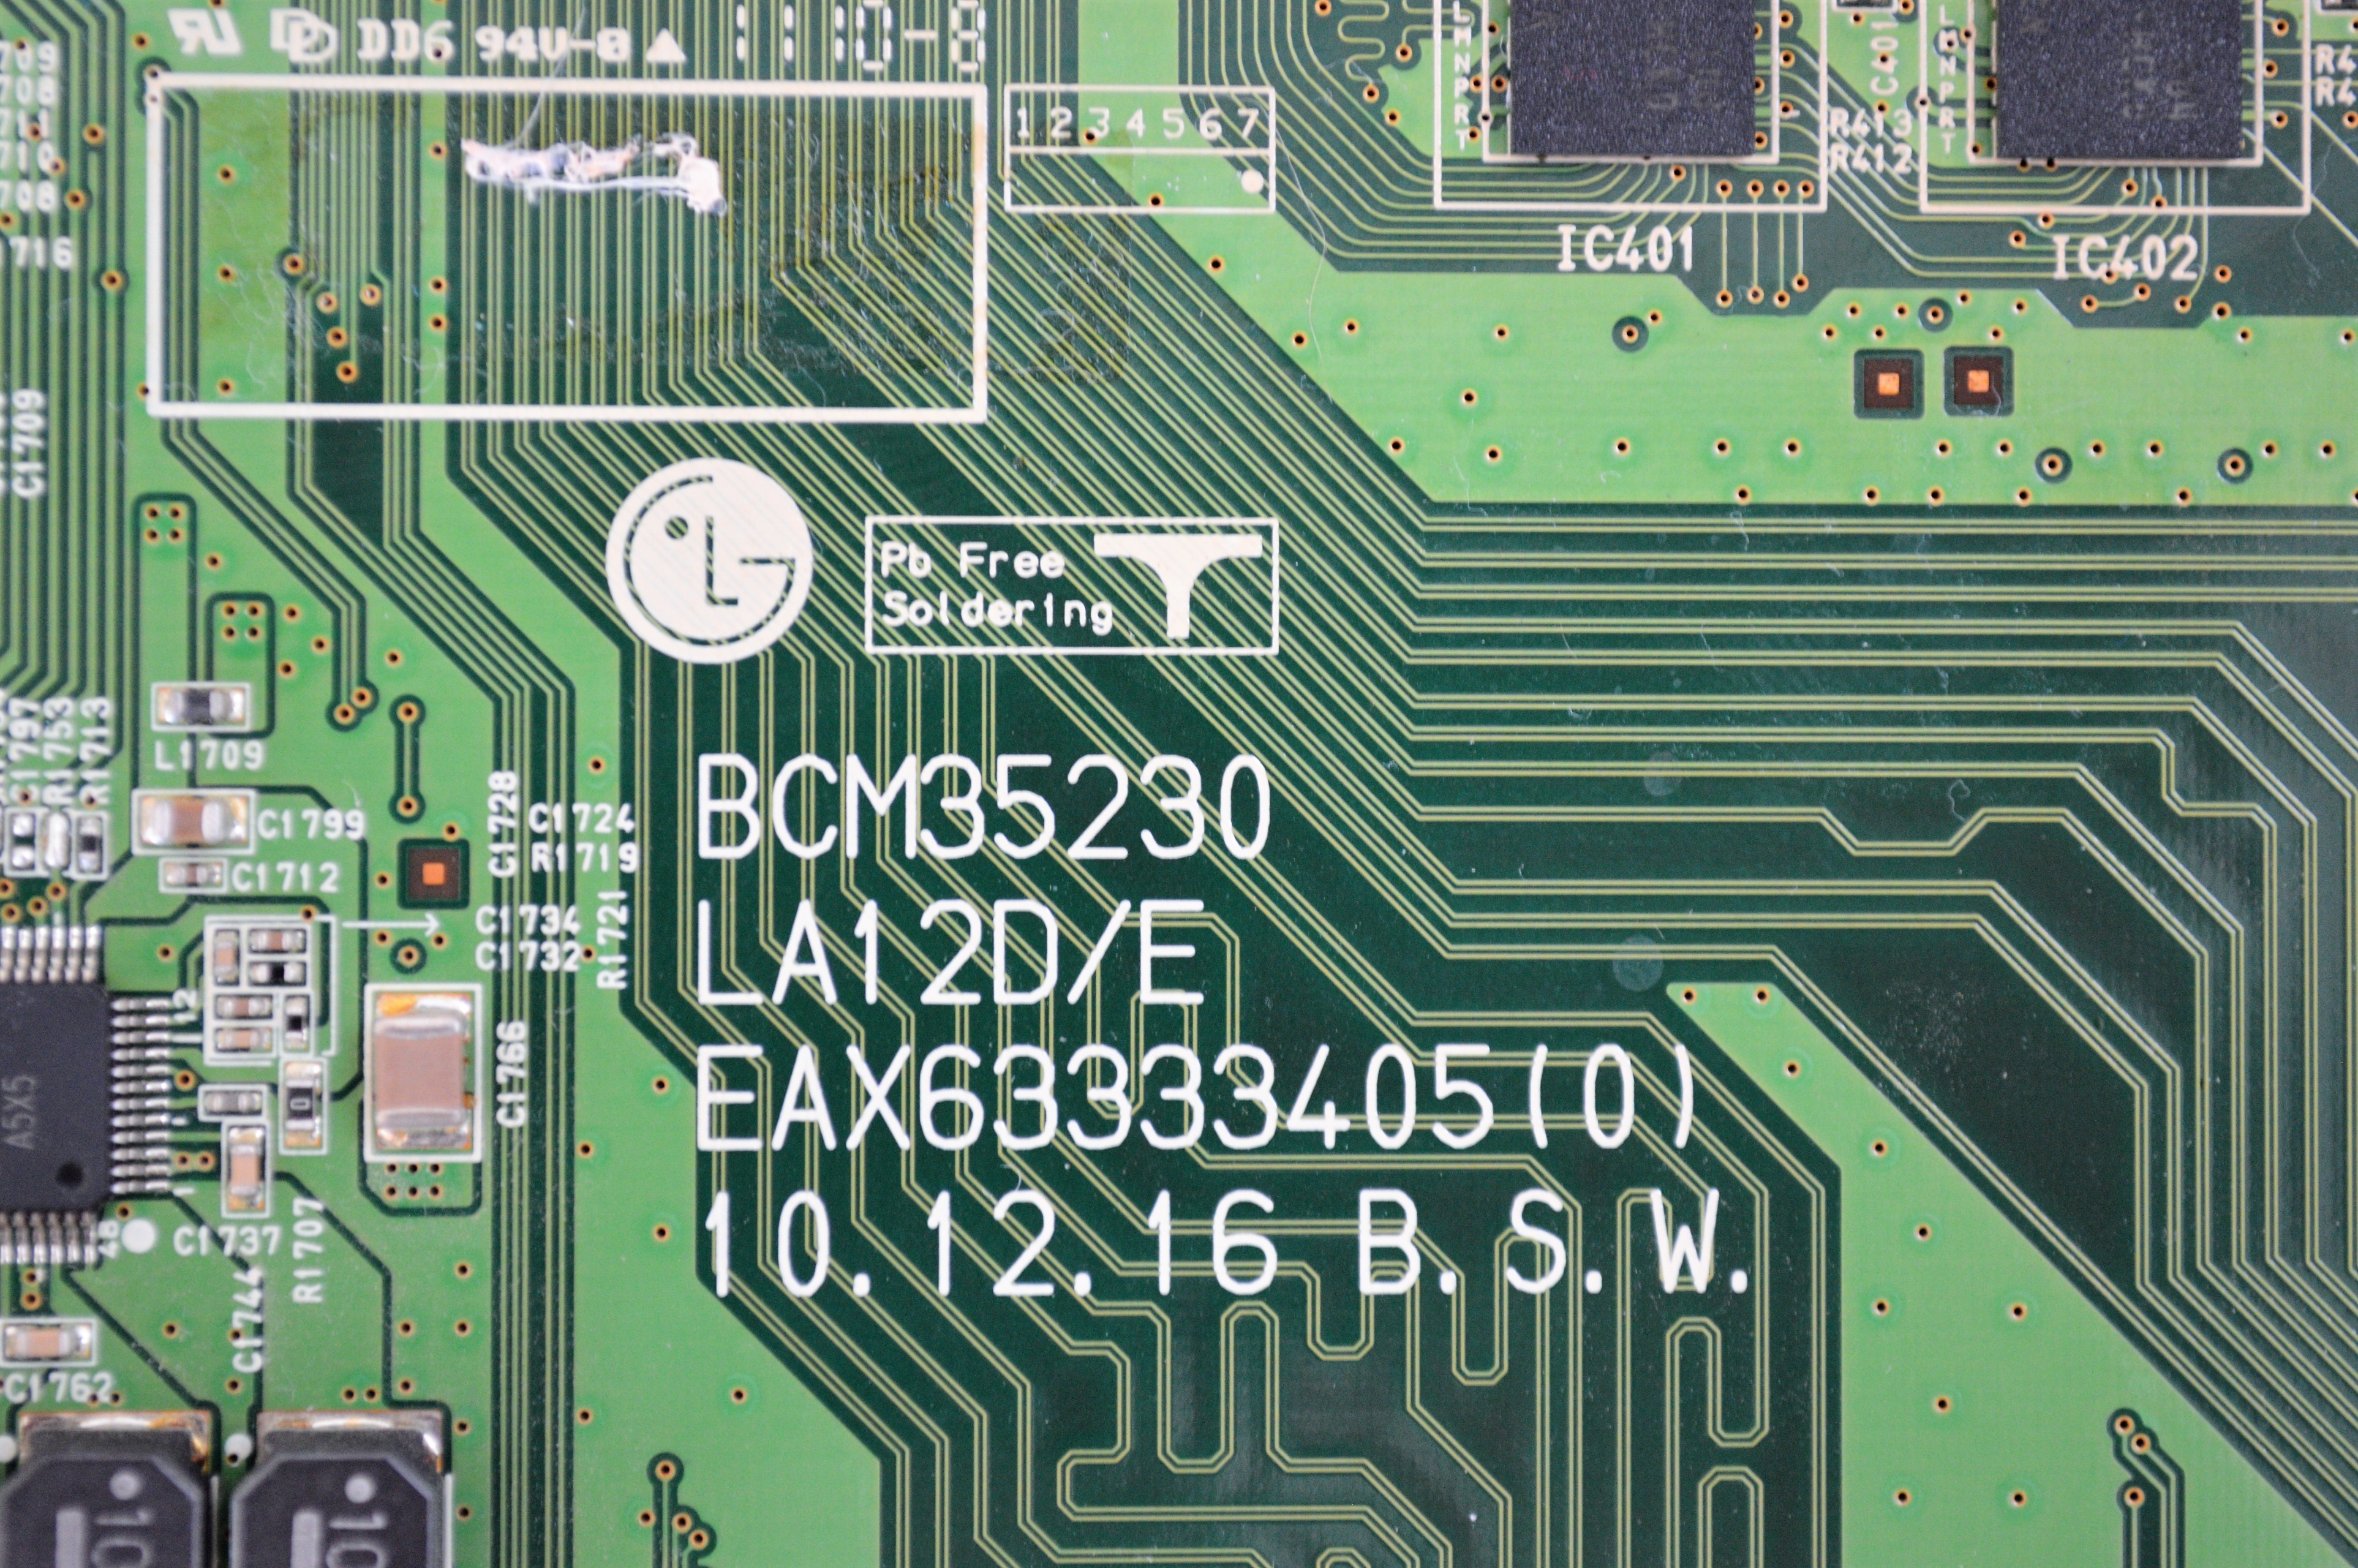 Mail-in Repair Service LG 55LV5500 MAINBOARD 